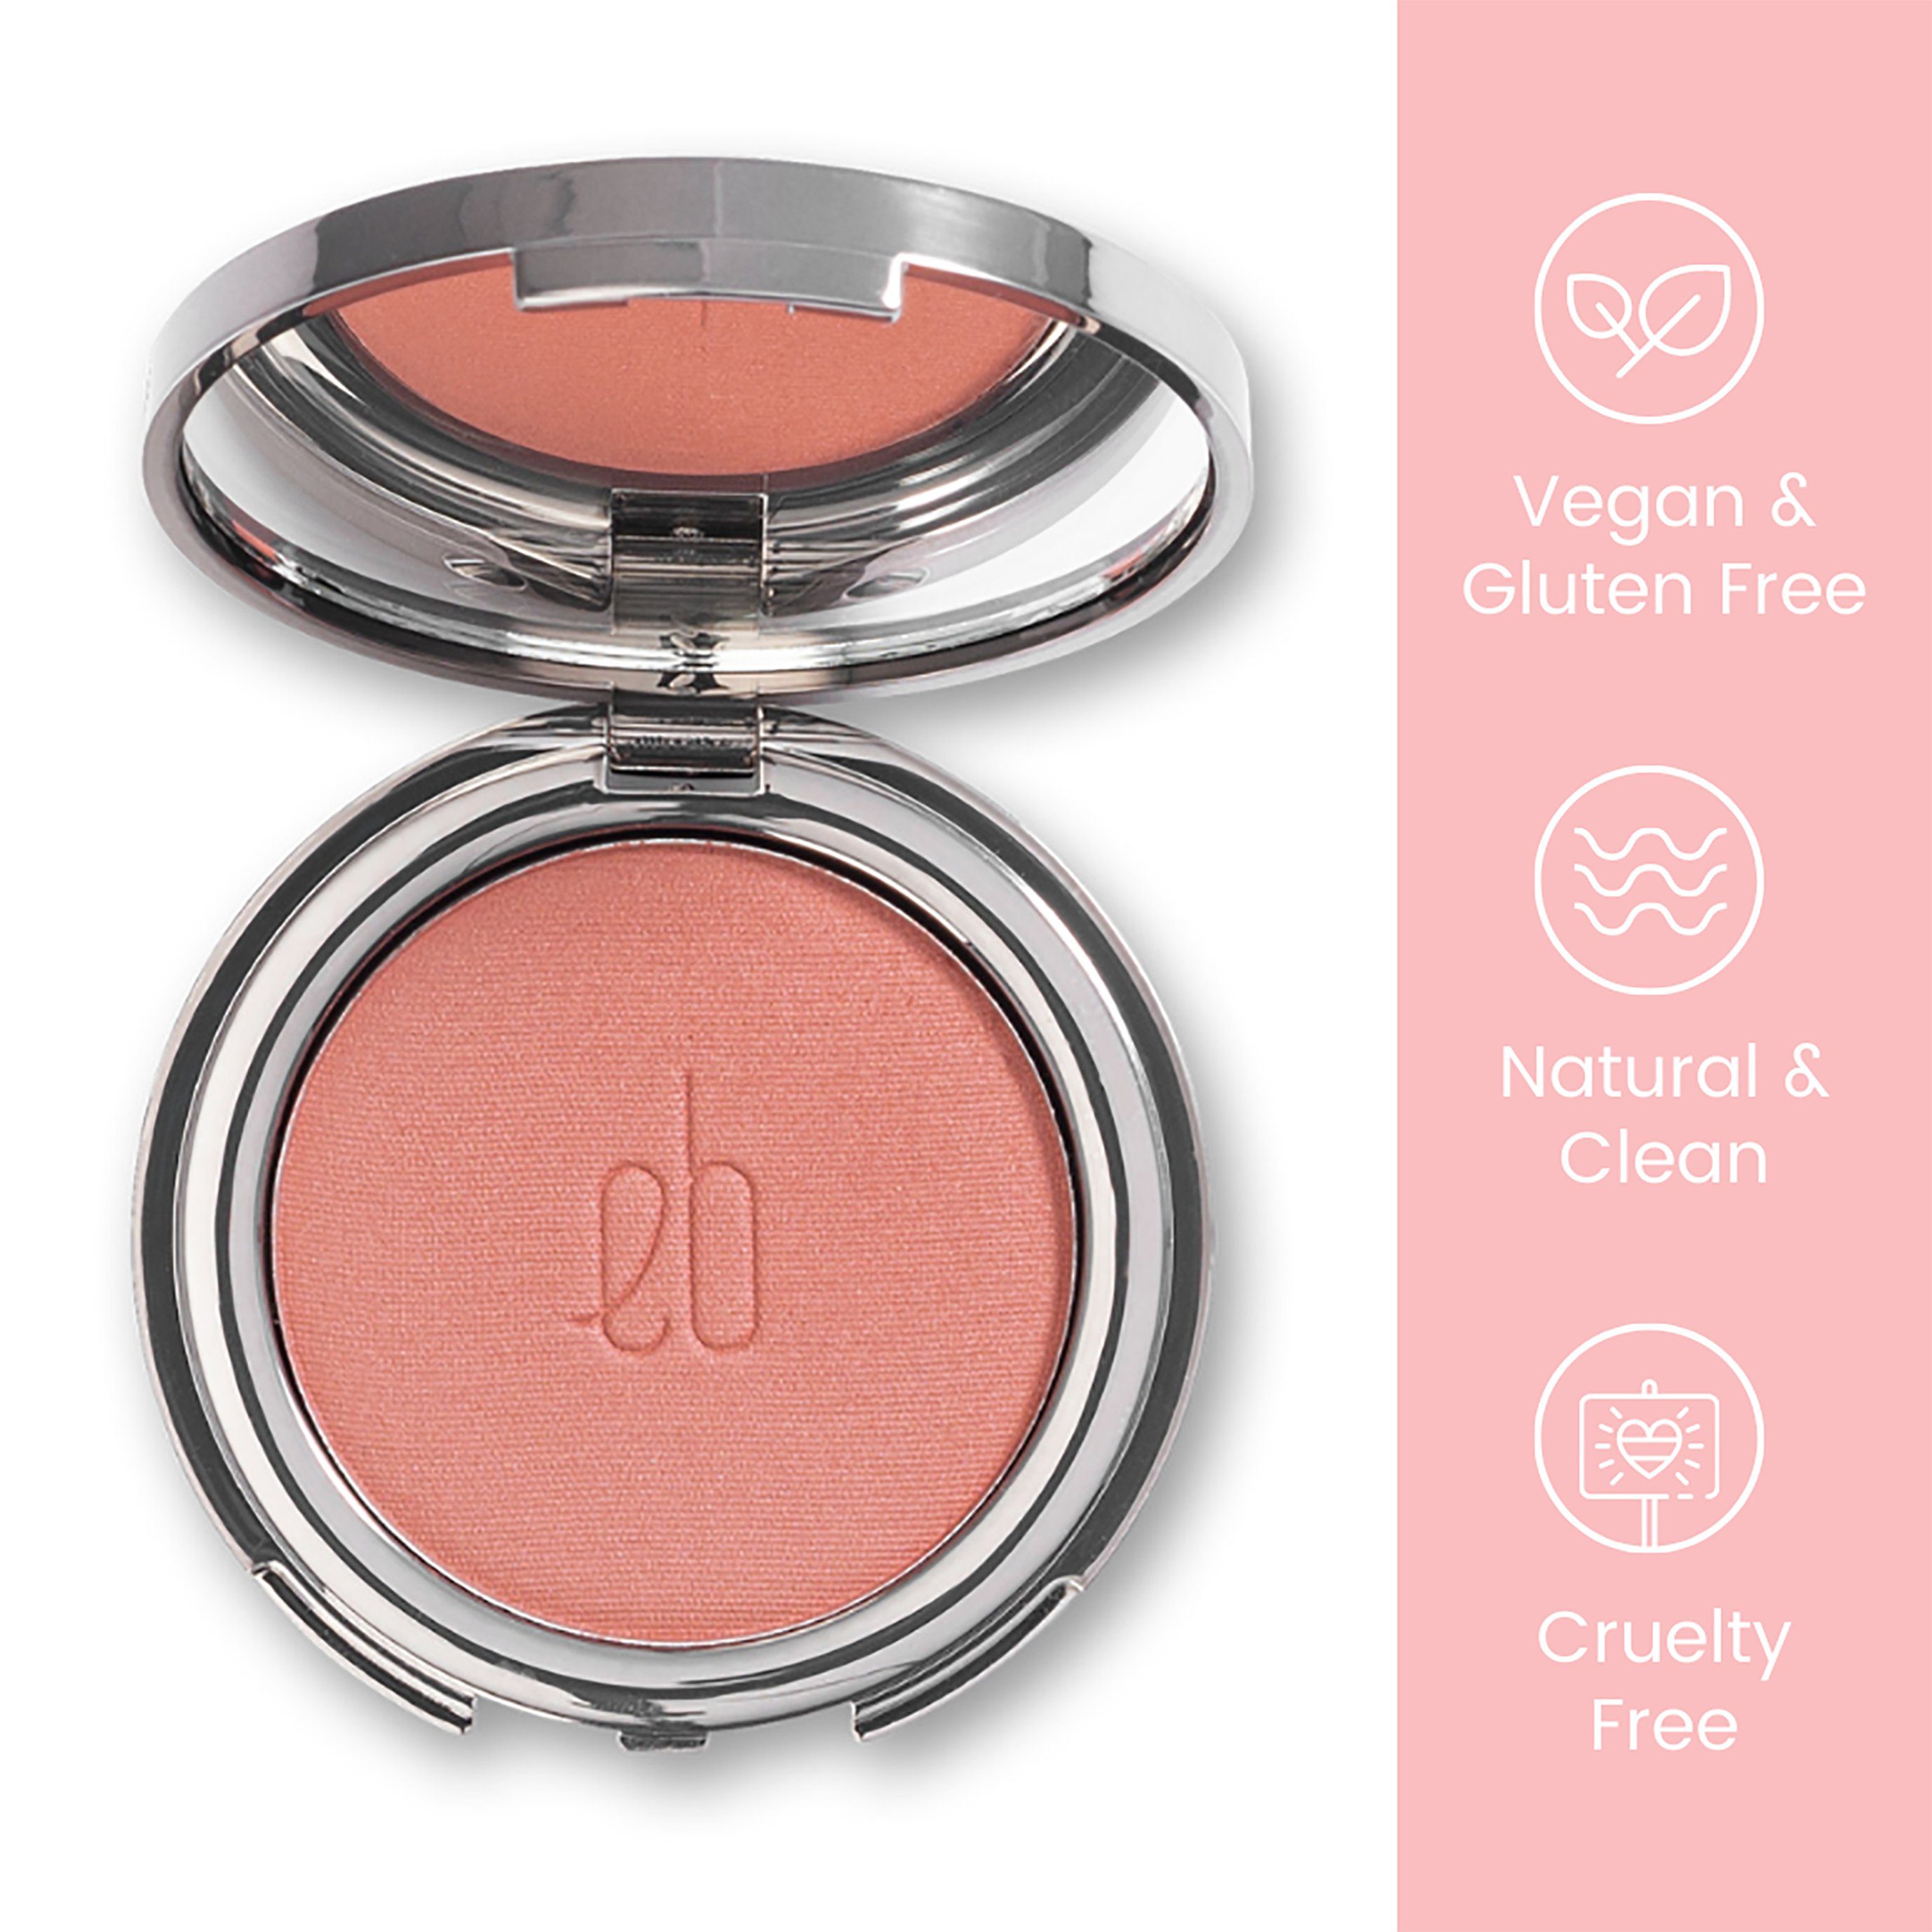 ETHEREAL BEAUTY® Rouge-Palette Mineral Veil Blush, Rouge, Natural, Langhaltend Gluten Vegan, Mineral Veil Clean, frei, Rose